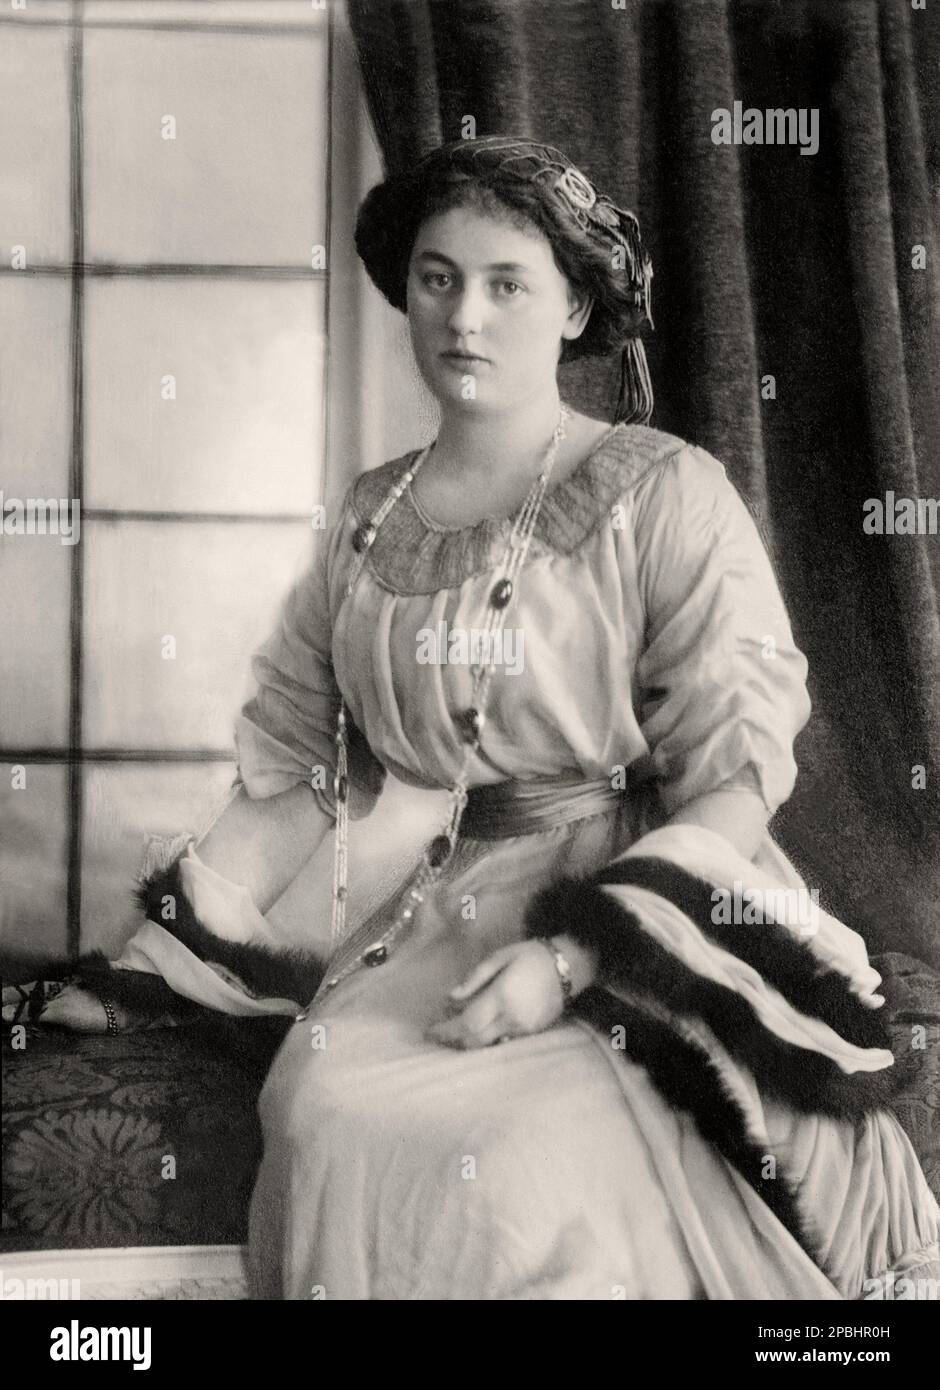 1908 c, GERMANY : Princess ALEXANDRA VICTORIA of Schleswig-Holstein-Sonderburg-Glucksburg ( 1887 - 1957 ), married in 1908 with Prince August Wilhelm of Prussia ( 1887– 1949 ), called Auwi, the fourth son of  Kaiser WILHELM II ( Guglielmo II ) HOHENZOLLERN , King of Prussen, Emperor of Germany (  1859 - 1941 ). From marriage born one son only: ALEXANDER FERDINAND of Prussia ( 1912 - 1985 ).    - REALI - ROYALTY - NOBILITY -  Nobiltà   -  profilo - profile - BELLE EPOQUE - FASHION - MODA  - Schleswig Holstein Sonderburg Glucksburg - pearls necklace - collana - perle - jewellery - jewels - bijou Stock Photo